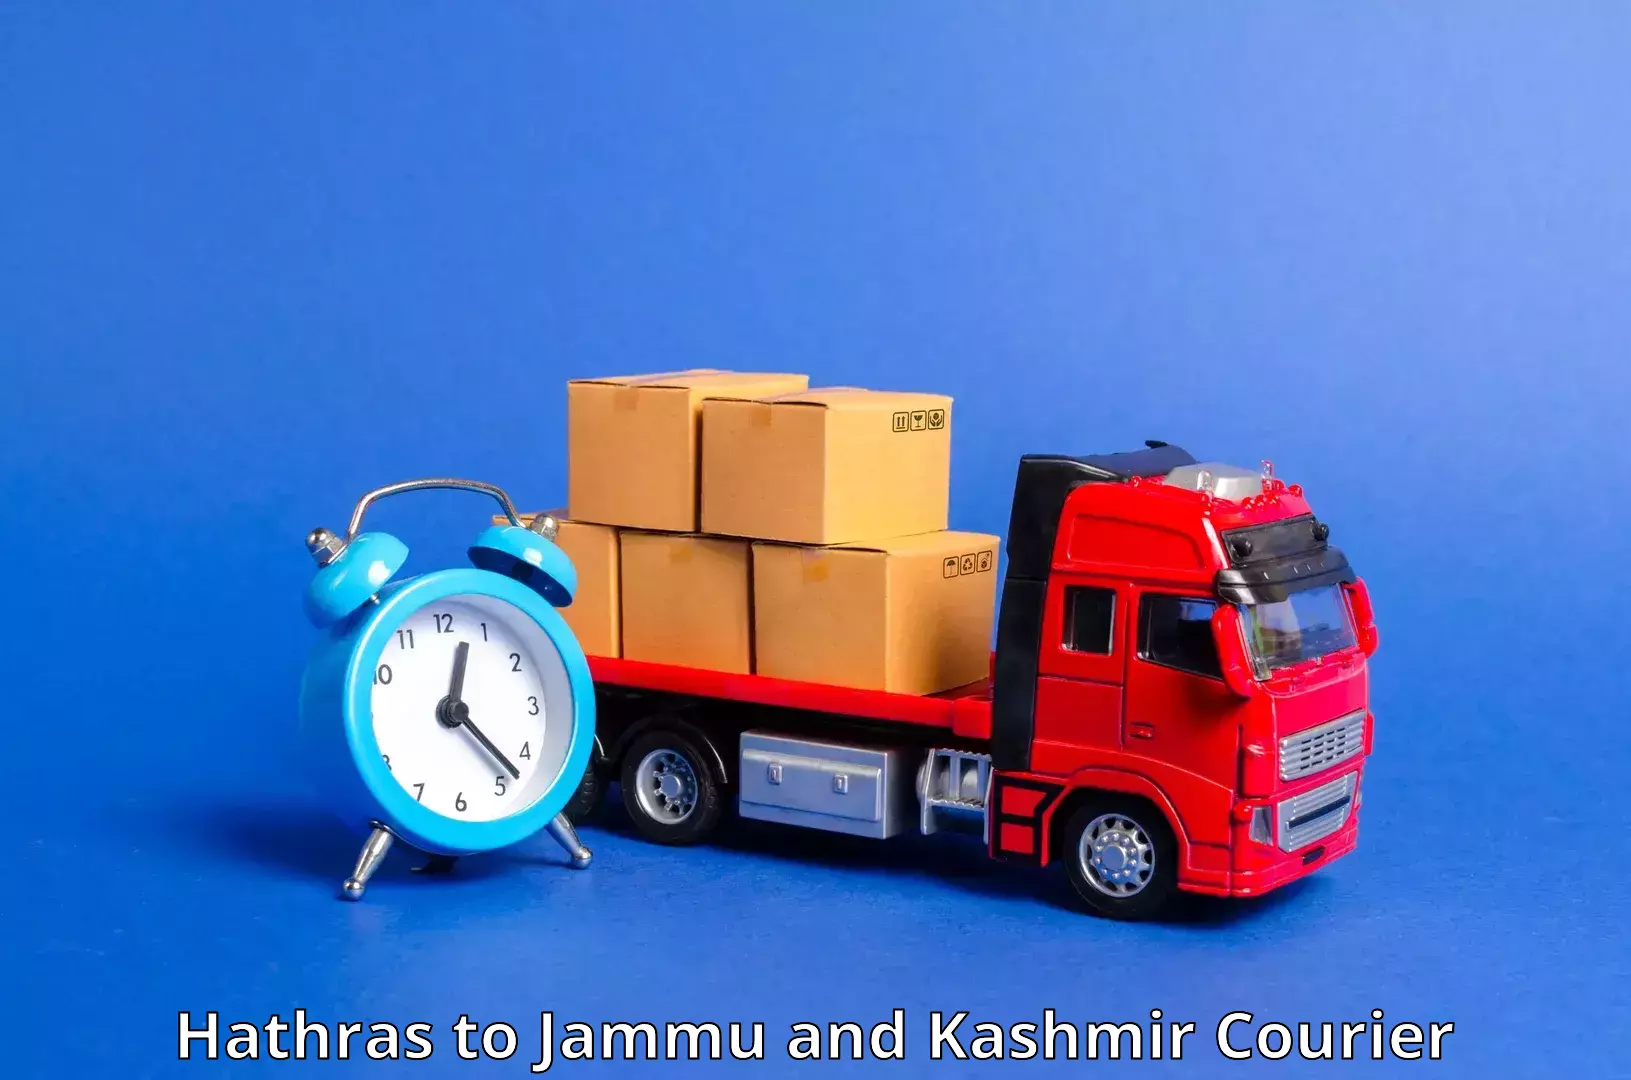 Parcel handling and care Hathras to Baramulla